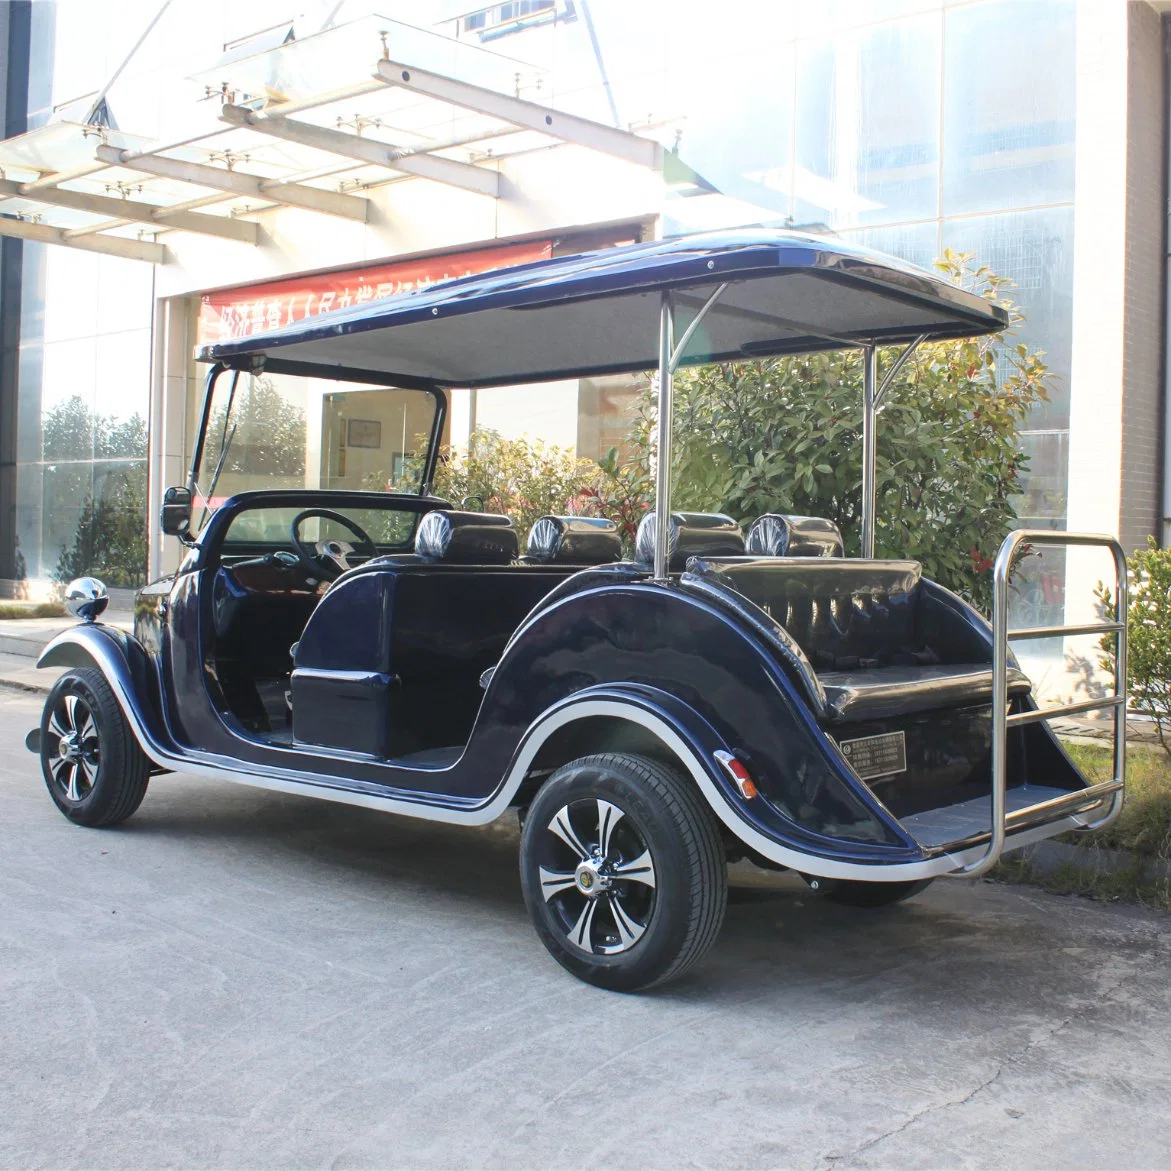 Electric Sightseeing Electric Vehicle Tourist Car4 6 Sitzer 8 12 Sitze